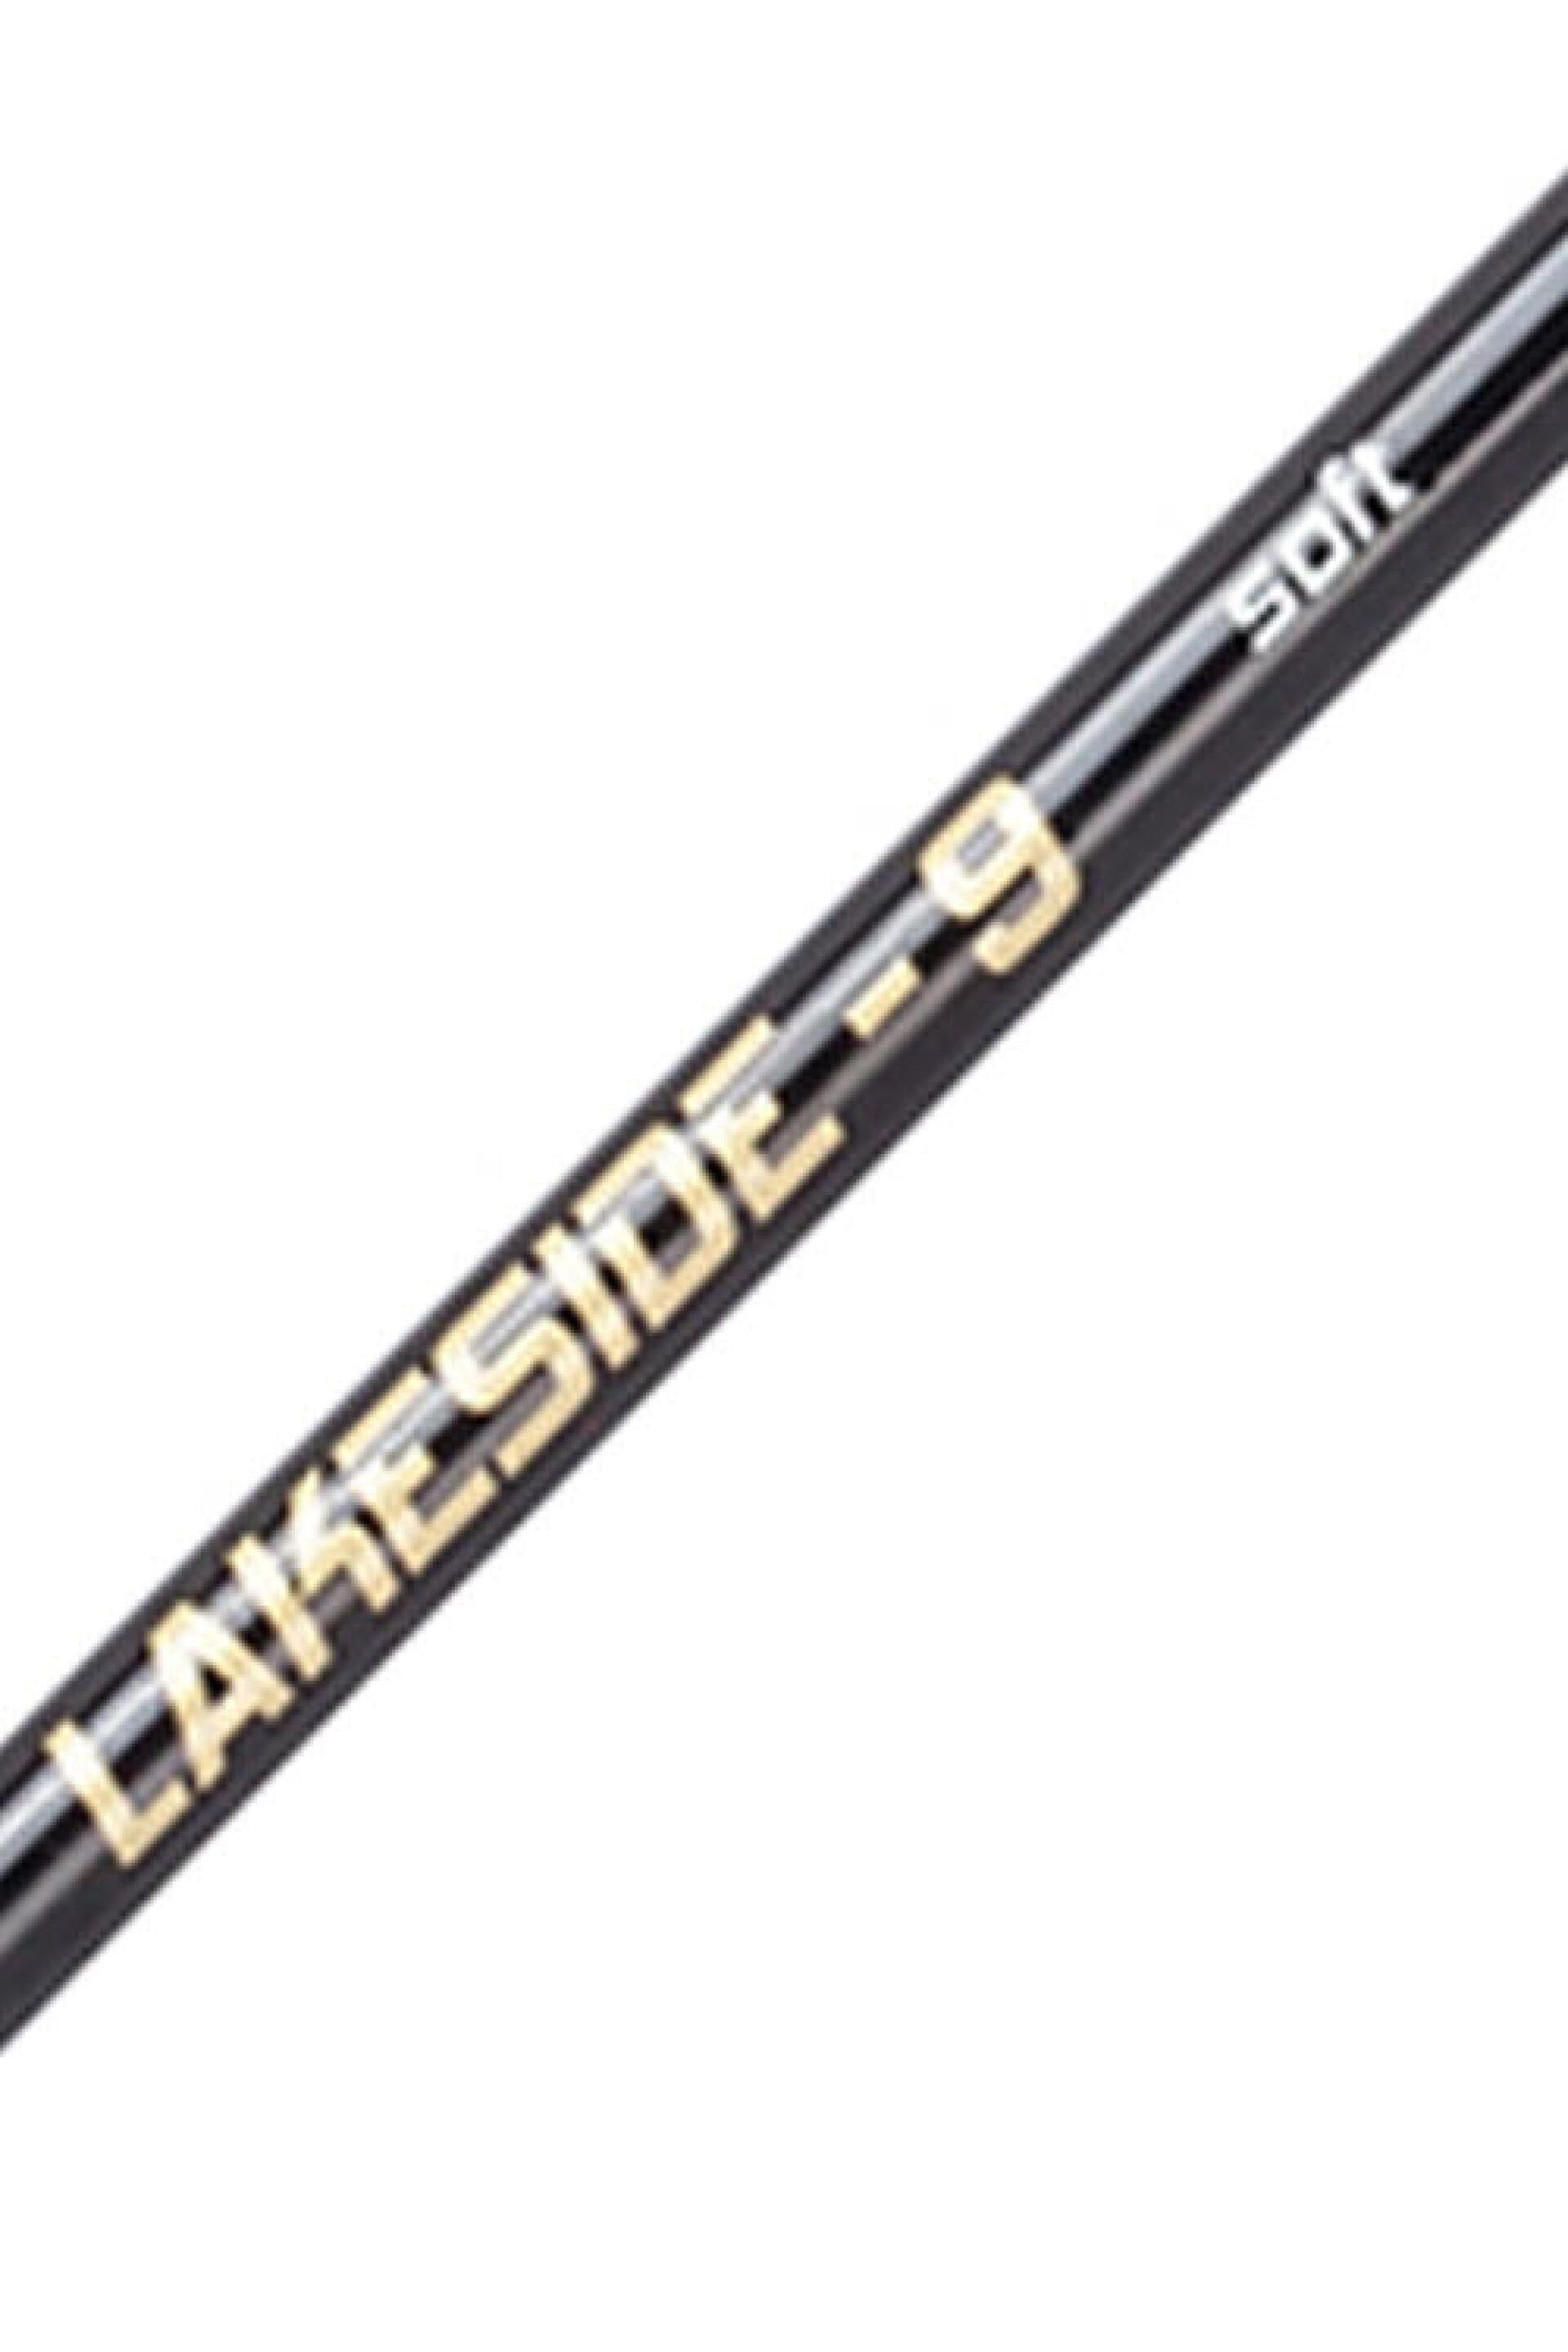 STILL FISHING ROD LAKESIDE-9 SOFT 450 AND LAKESIDE 9 SOFT TRAVEL 450: user guide, repair